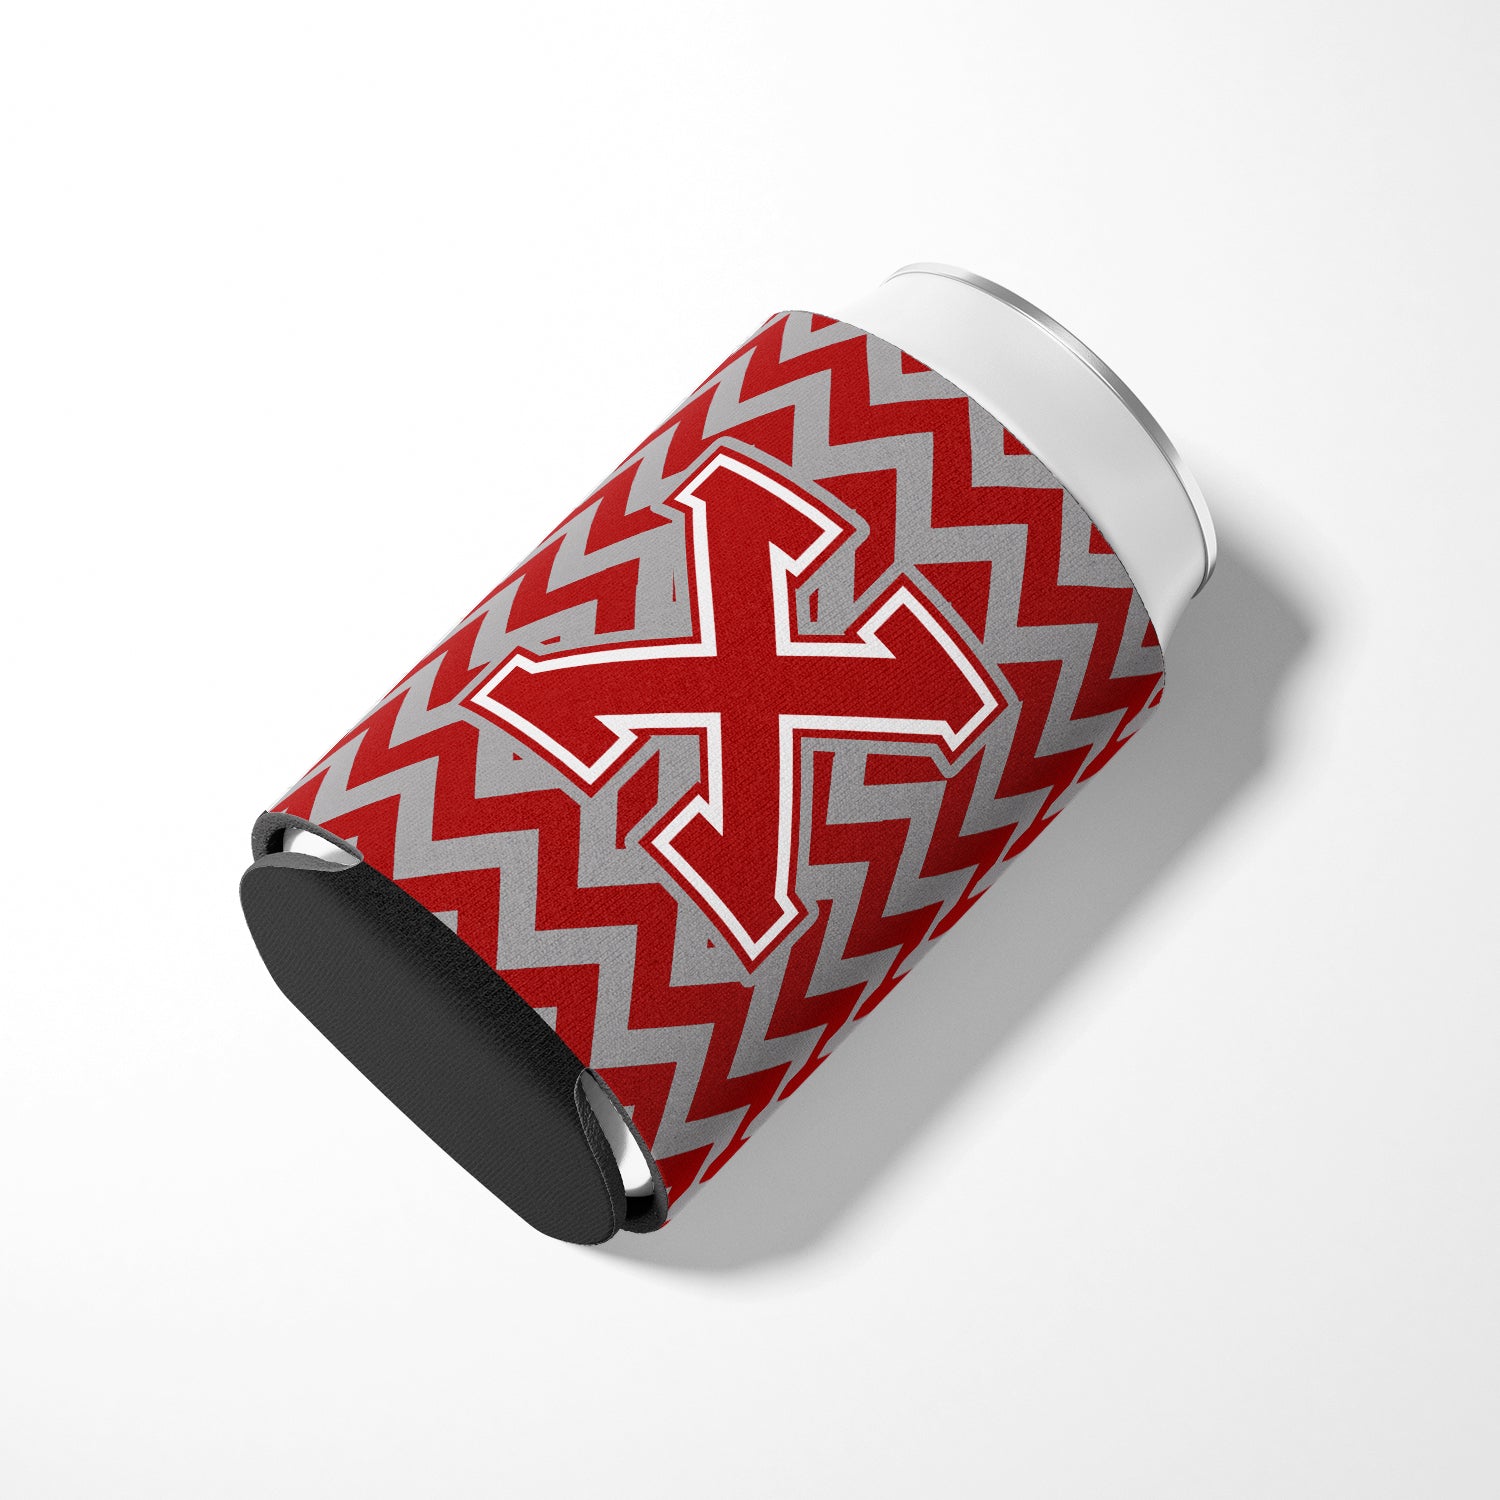 Letter X Chevron Maroon and White Can or Bottle Hugger CJ1049-XCC.